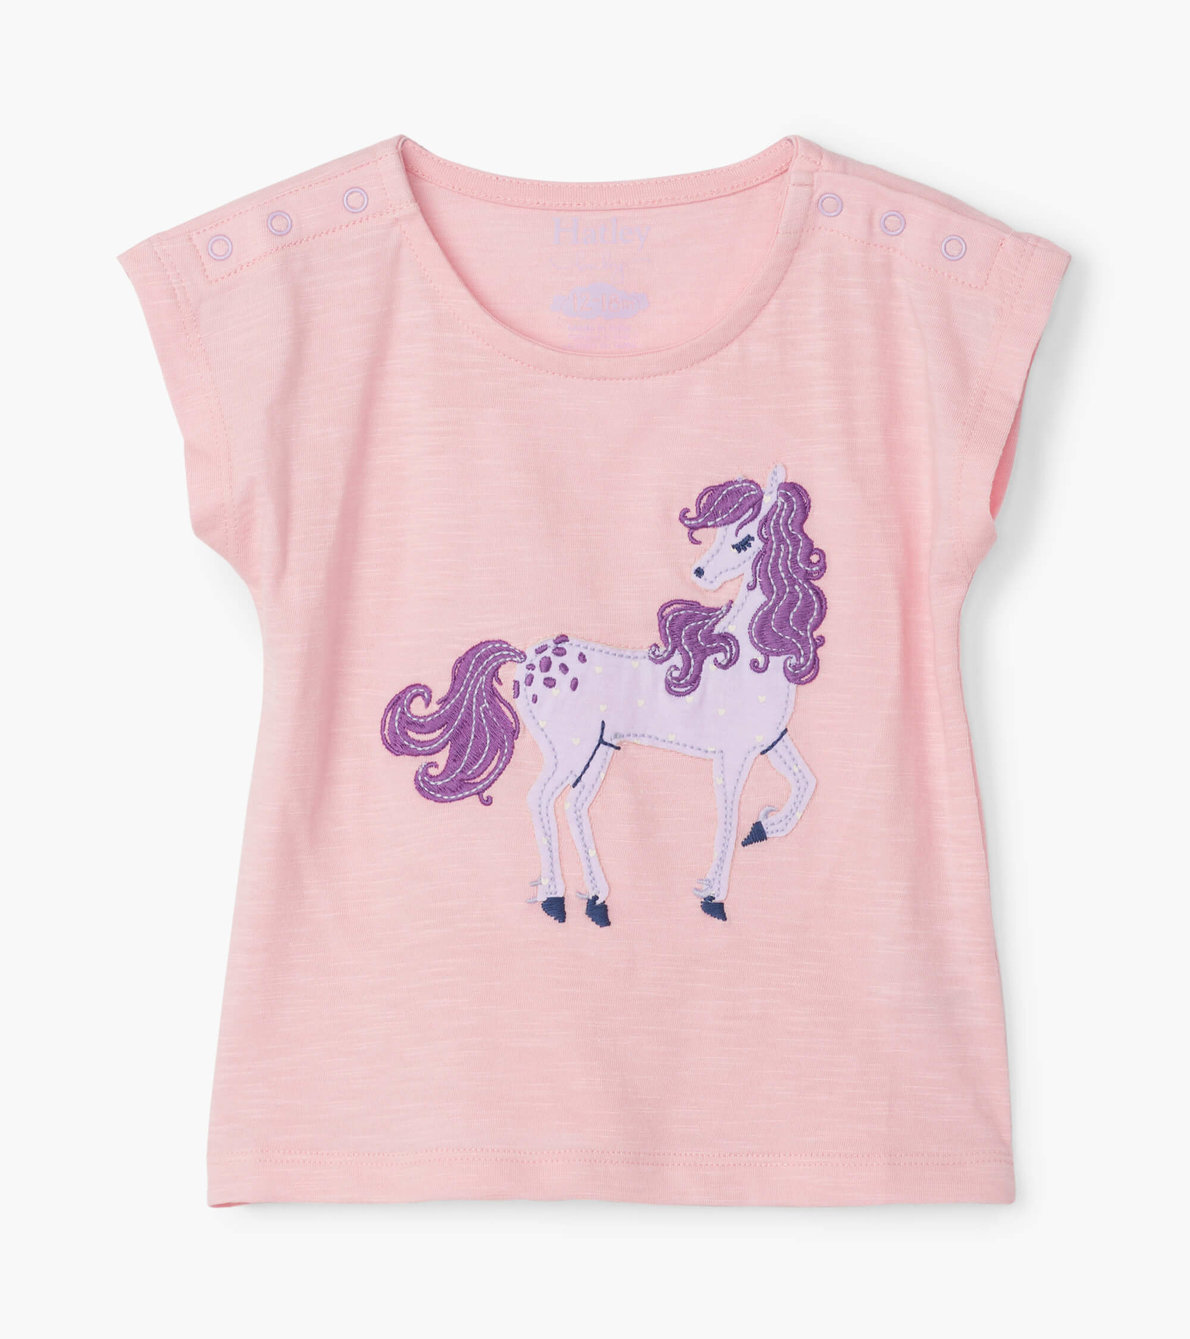 View larger image of Purple Pony Baby Tee